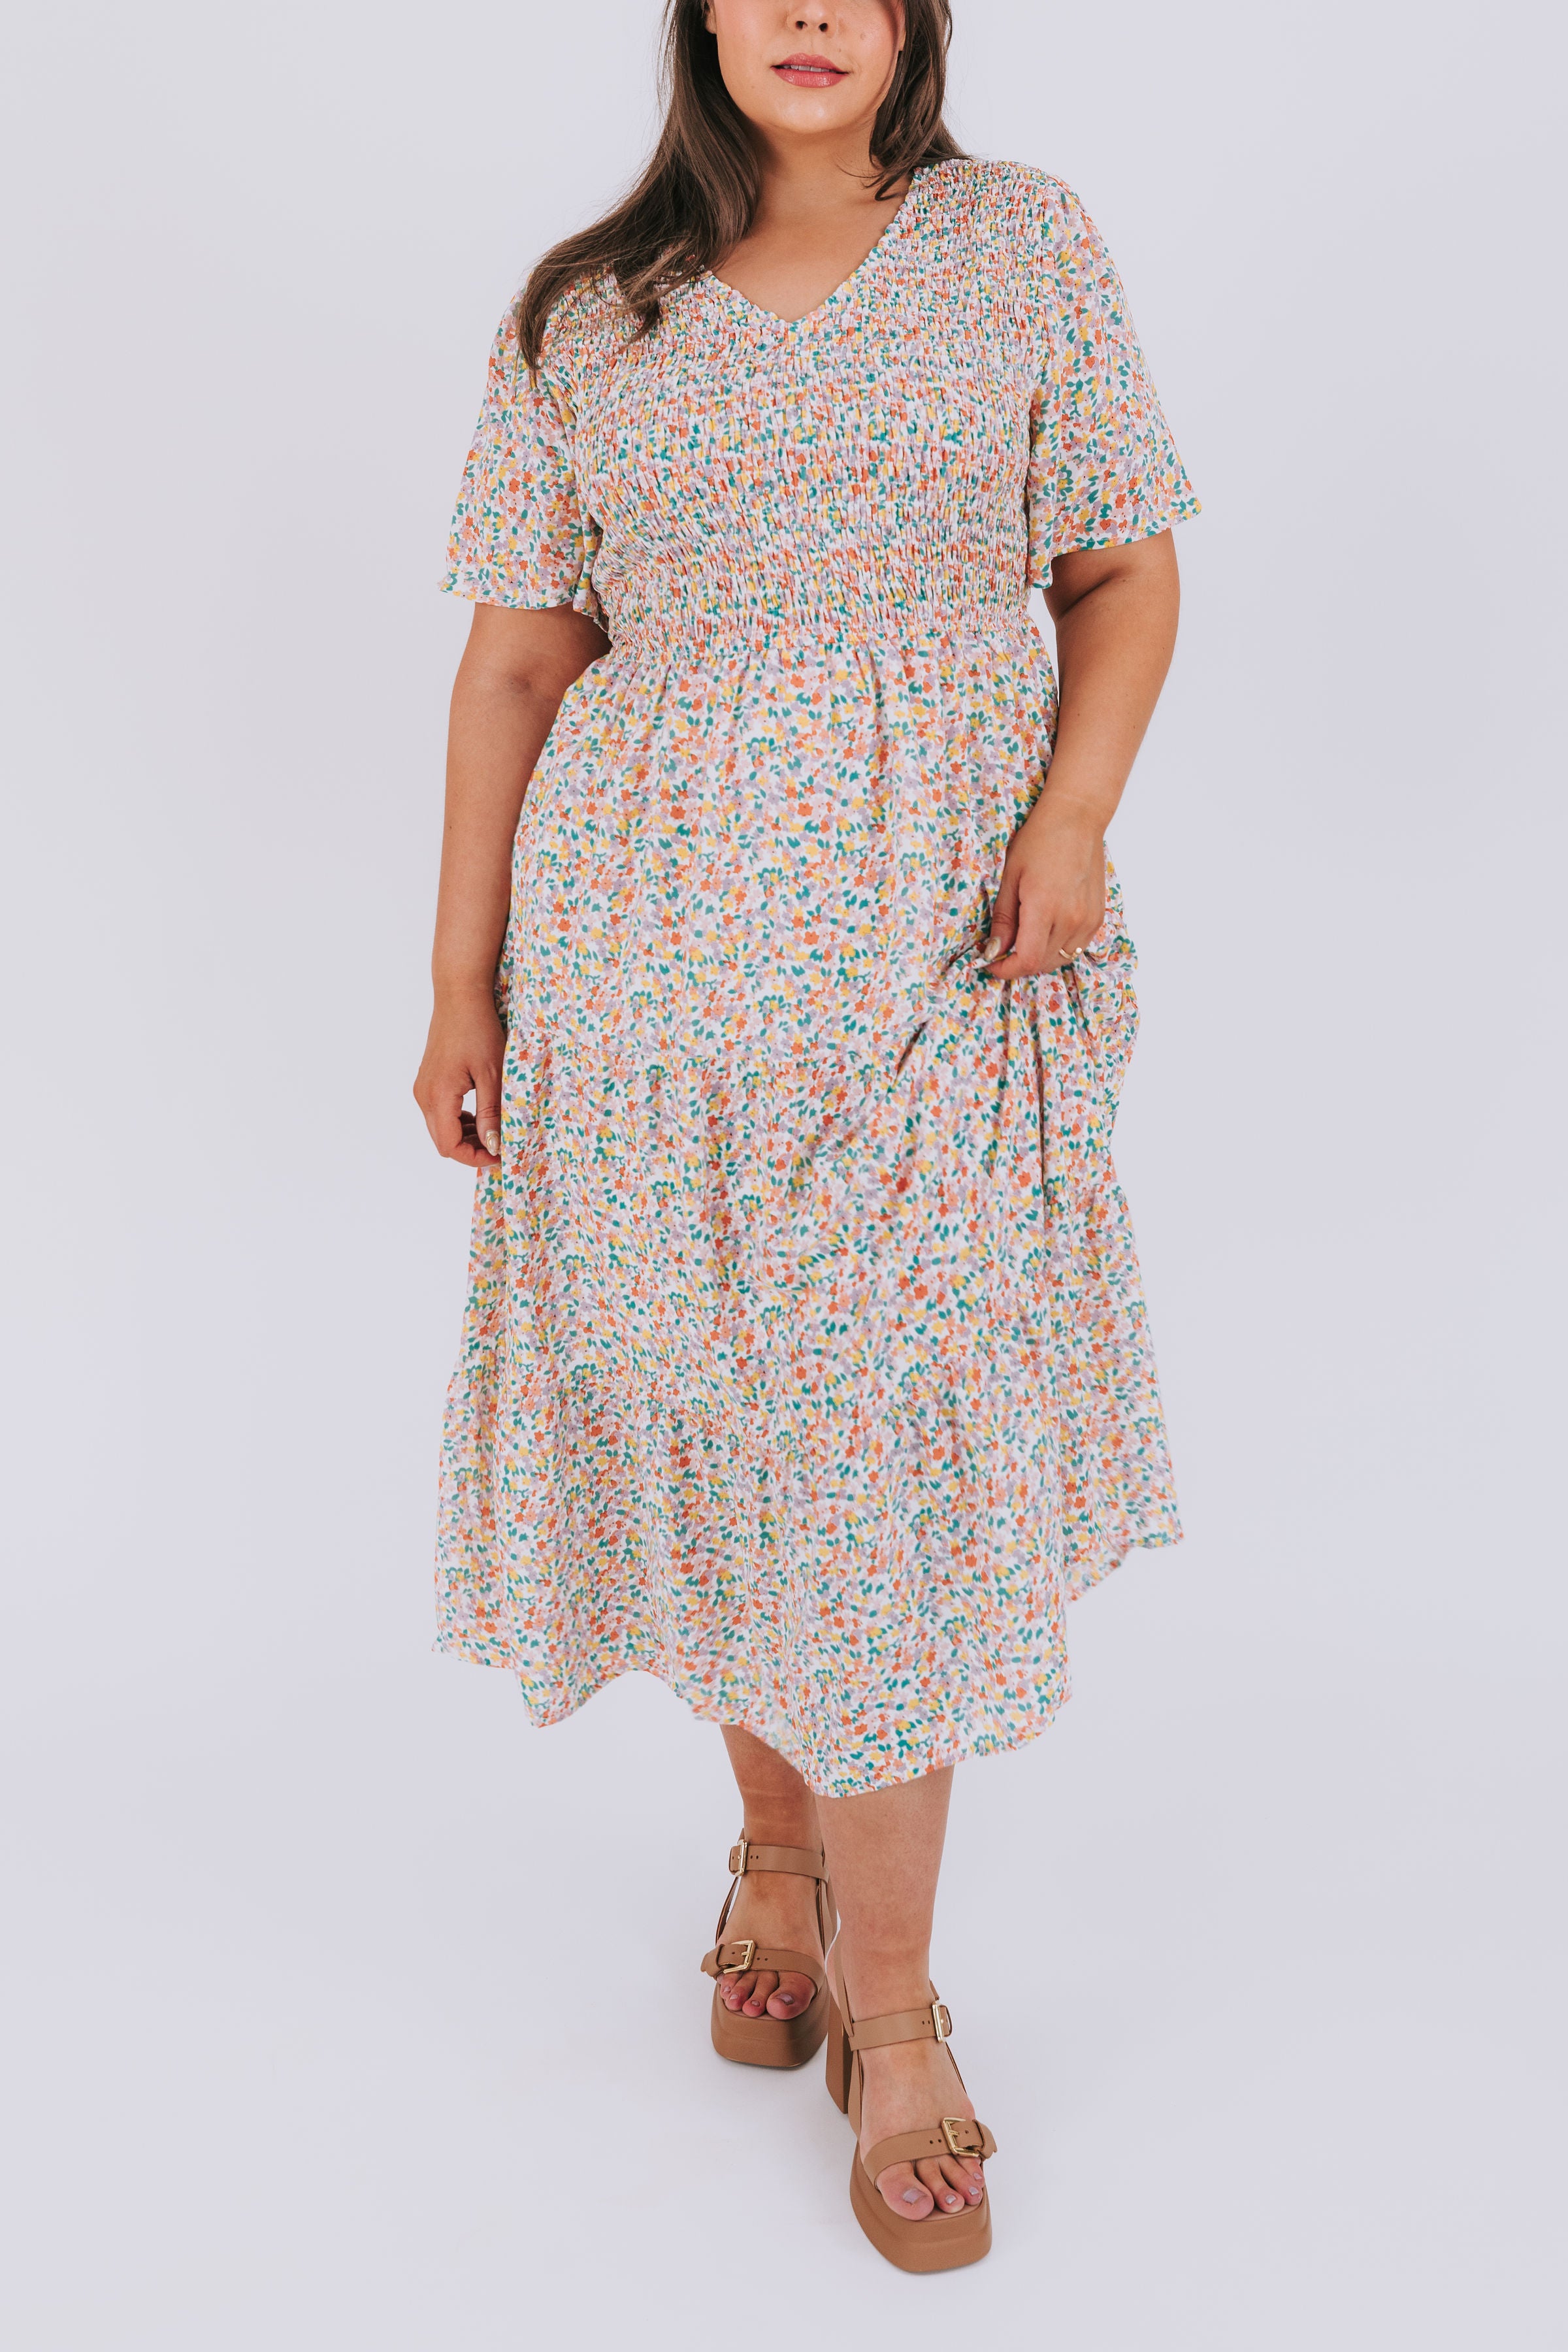 PLUS SIZE - Middle Of The Song Dress - 2 Colors!